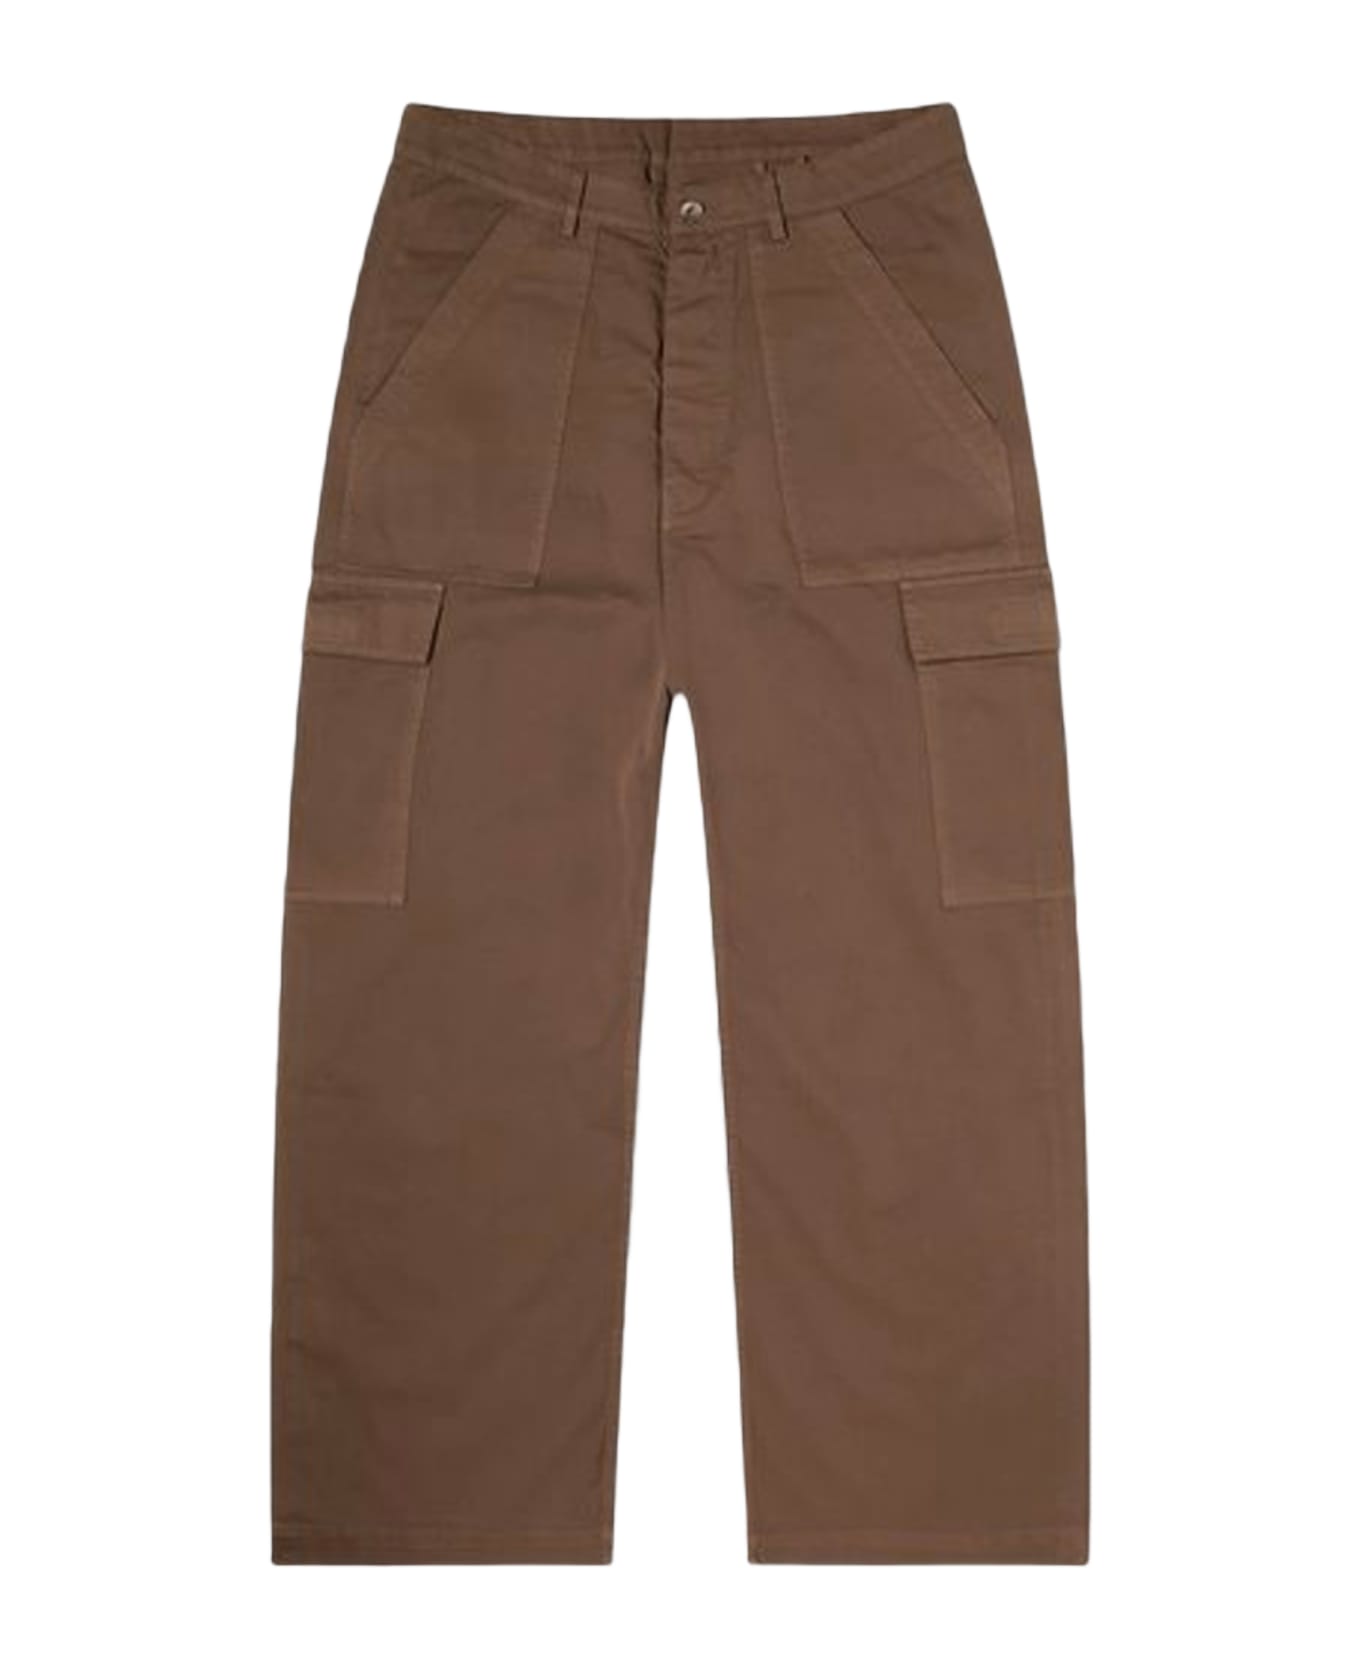 DRKSHDW Cargo Trousers Brown cotton cargo pant - Cargo trousers - Fango ボトムス